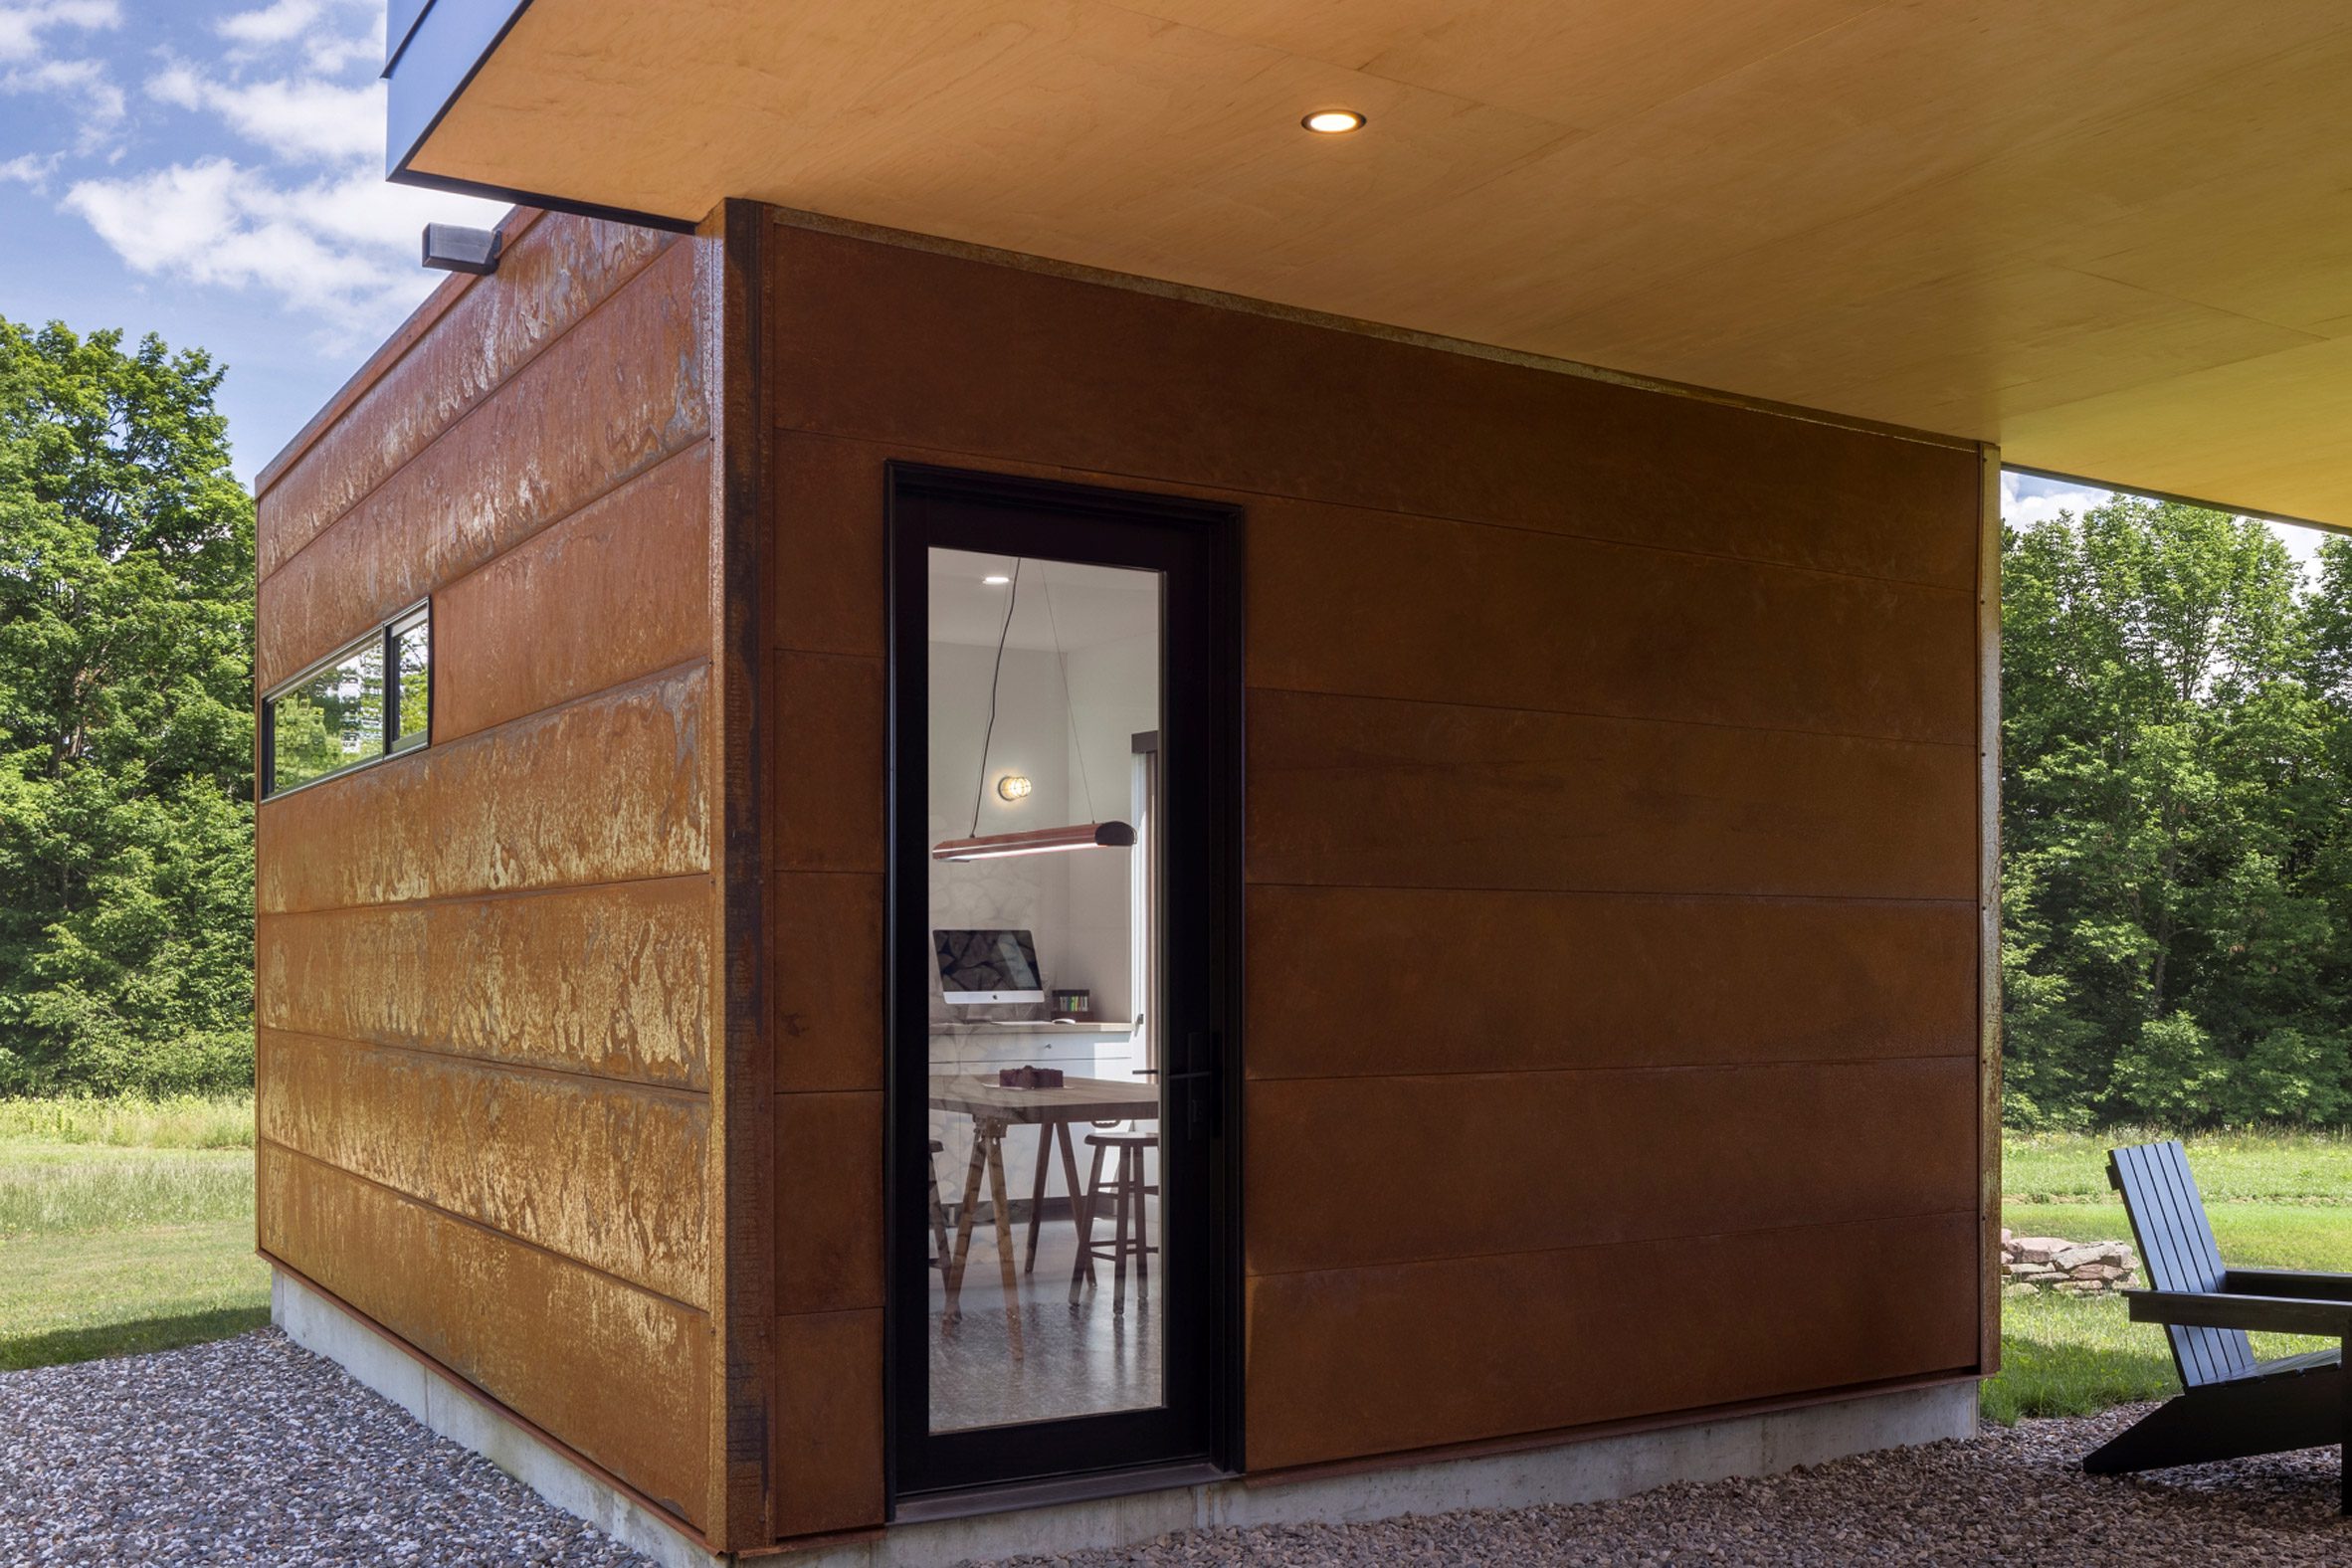 Corten steel cladding by Studio MM on dogtrot-style house